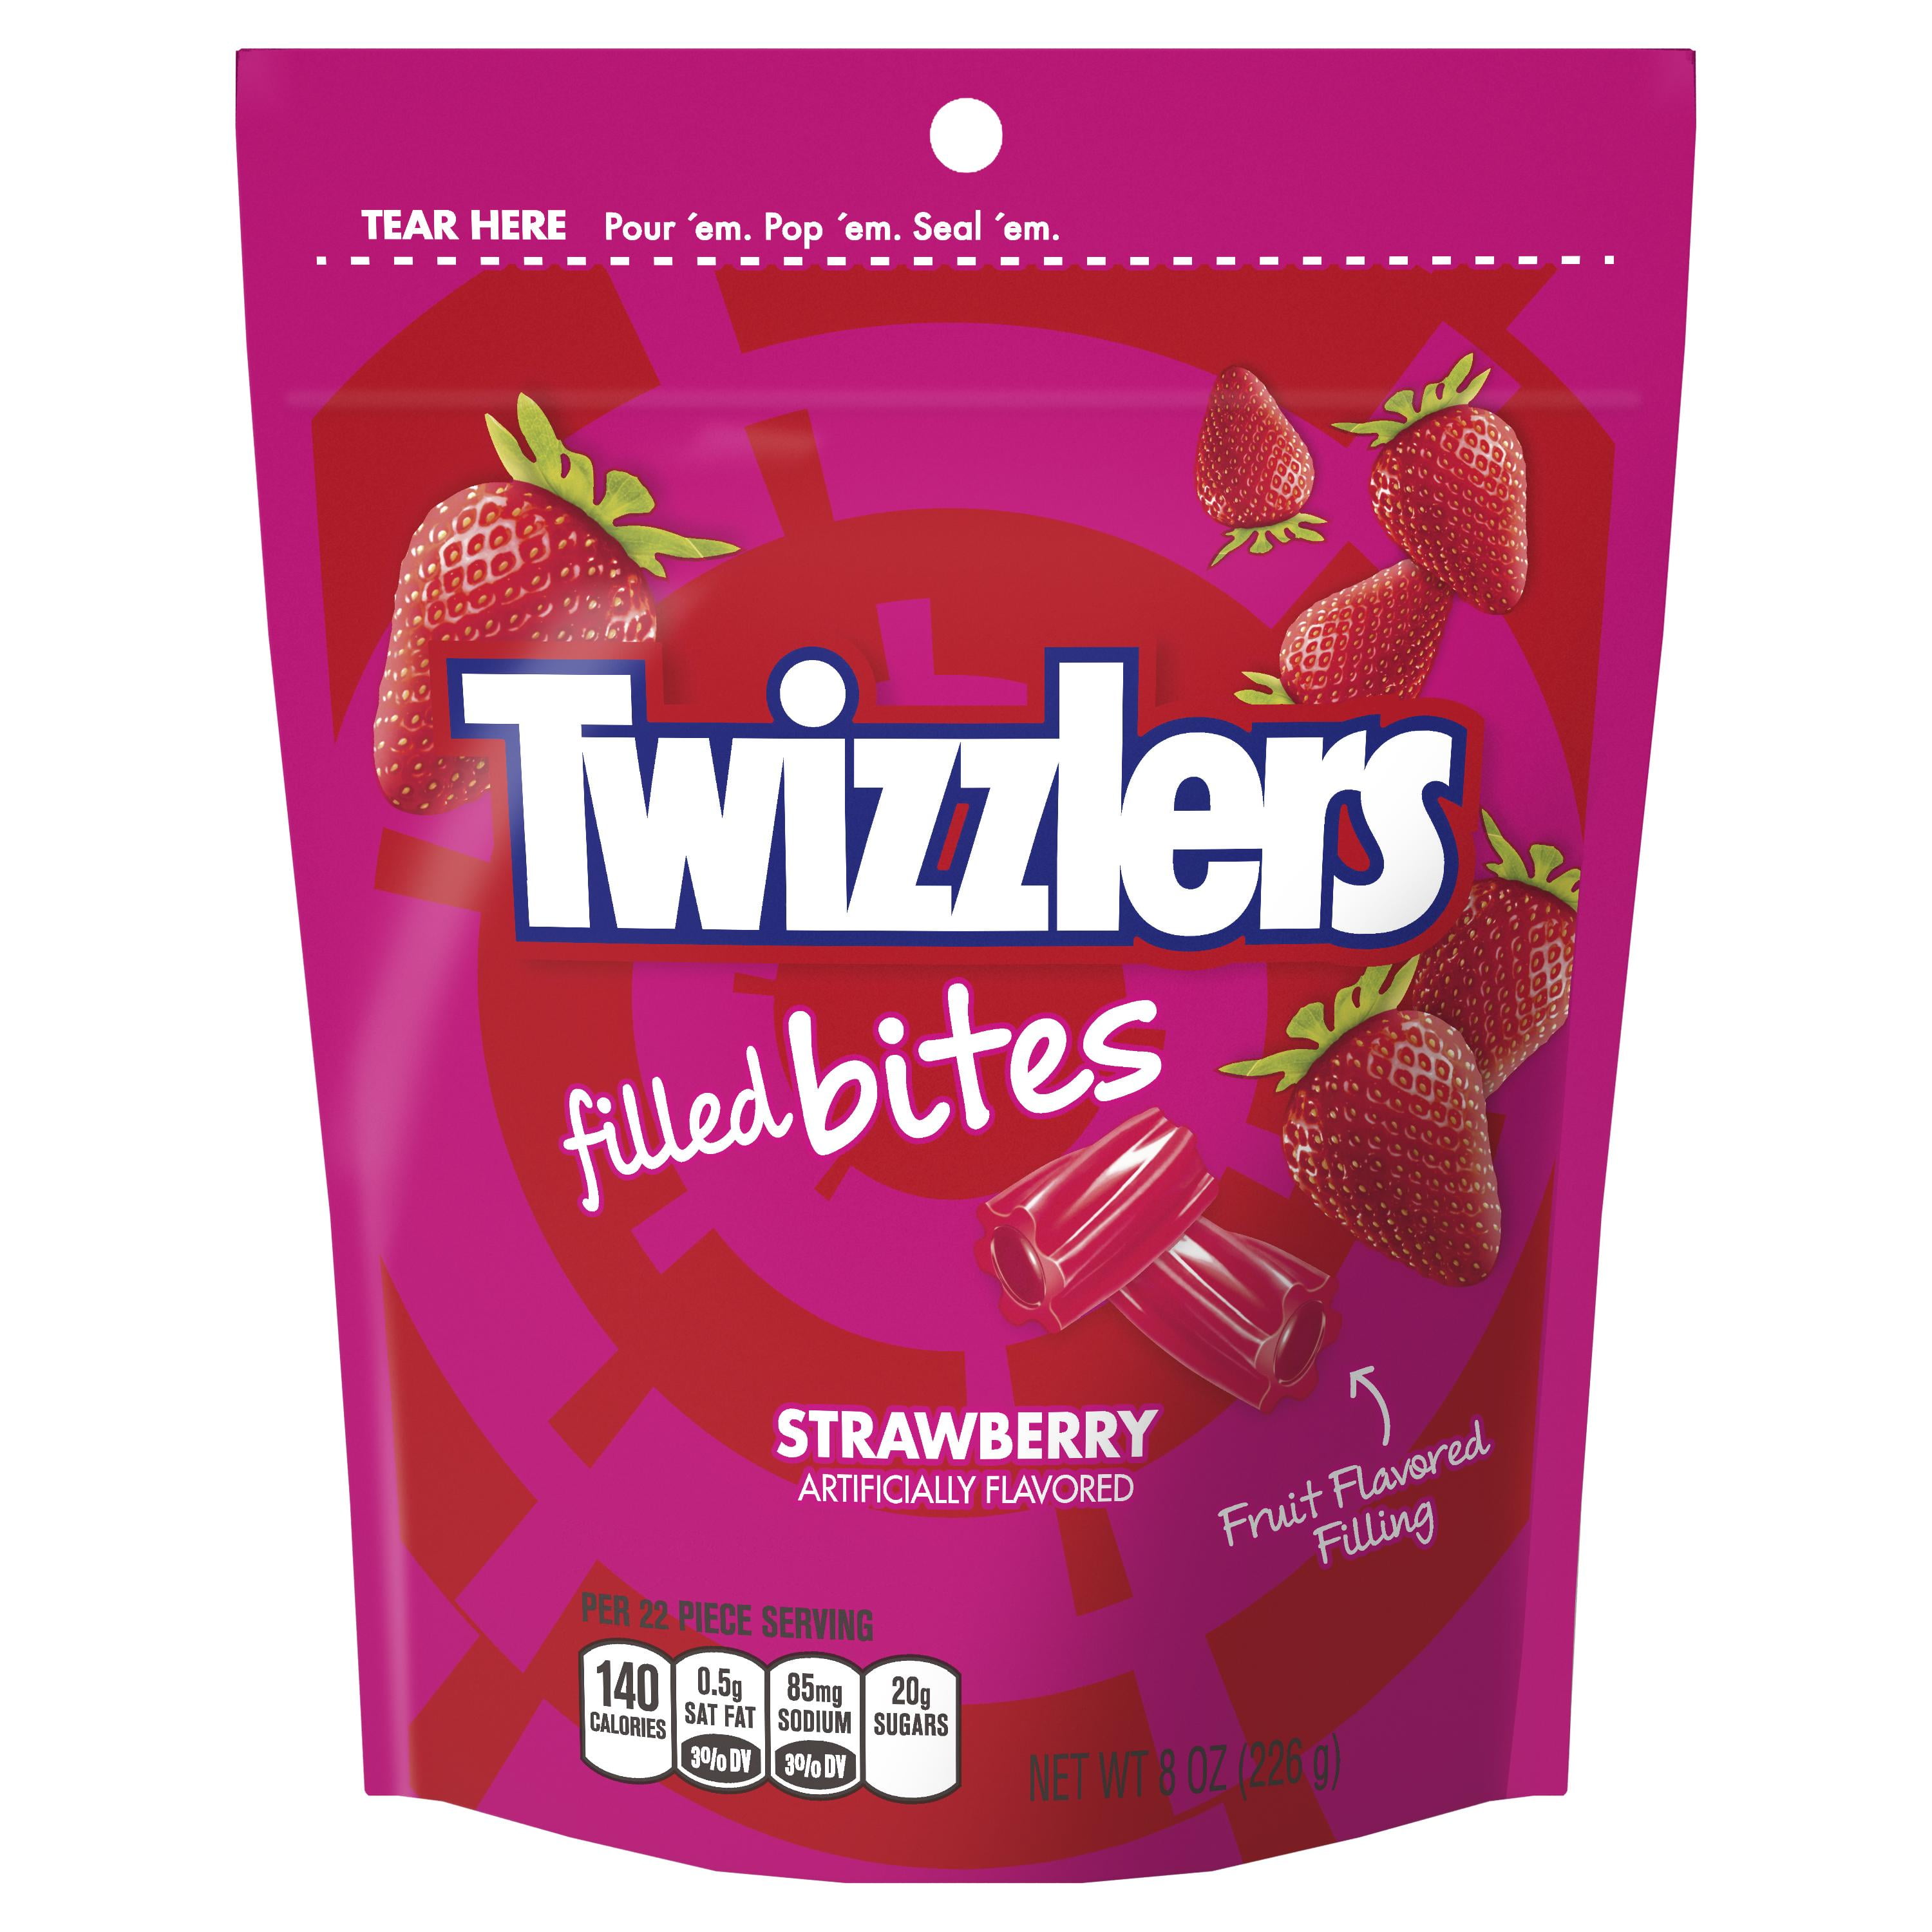 Twizzlers, Filled Bites Strawberry Flavor Chewy Candy, 8 Oz. 